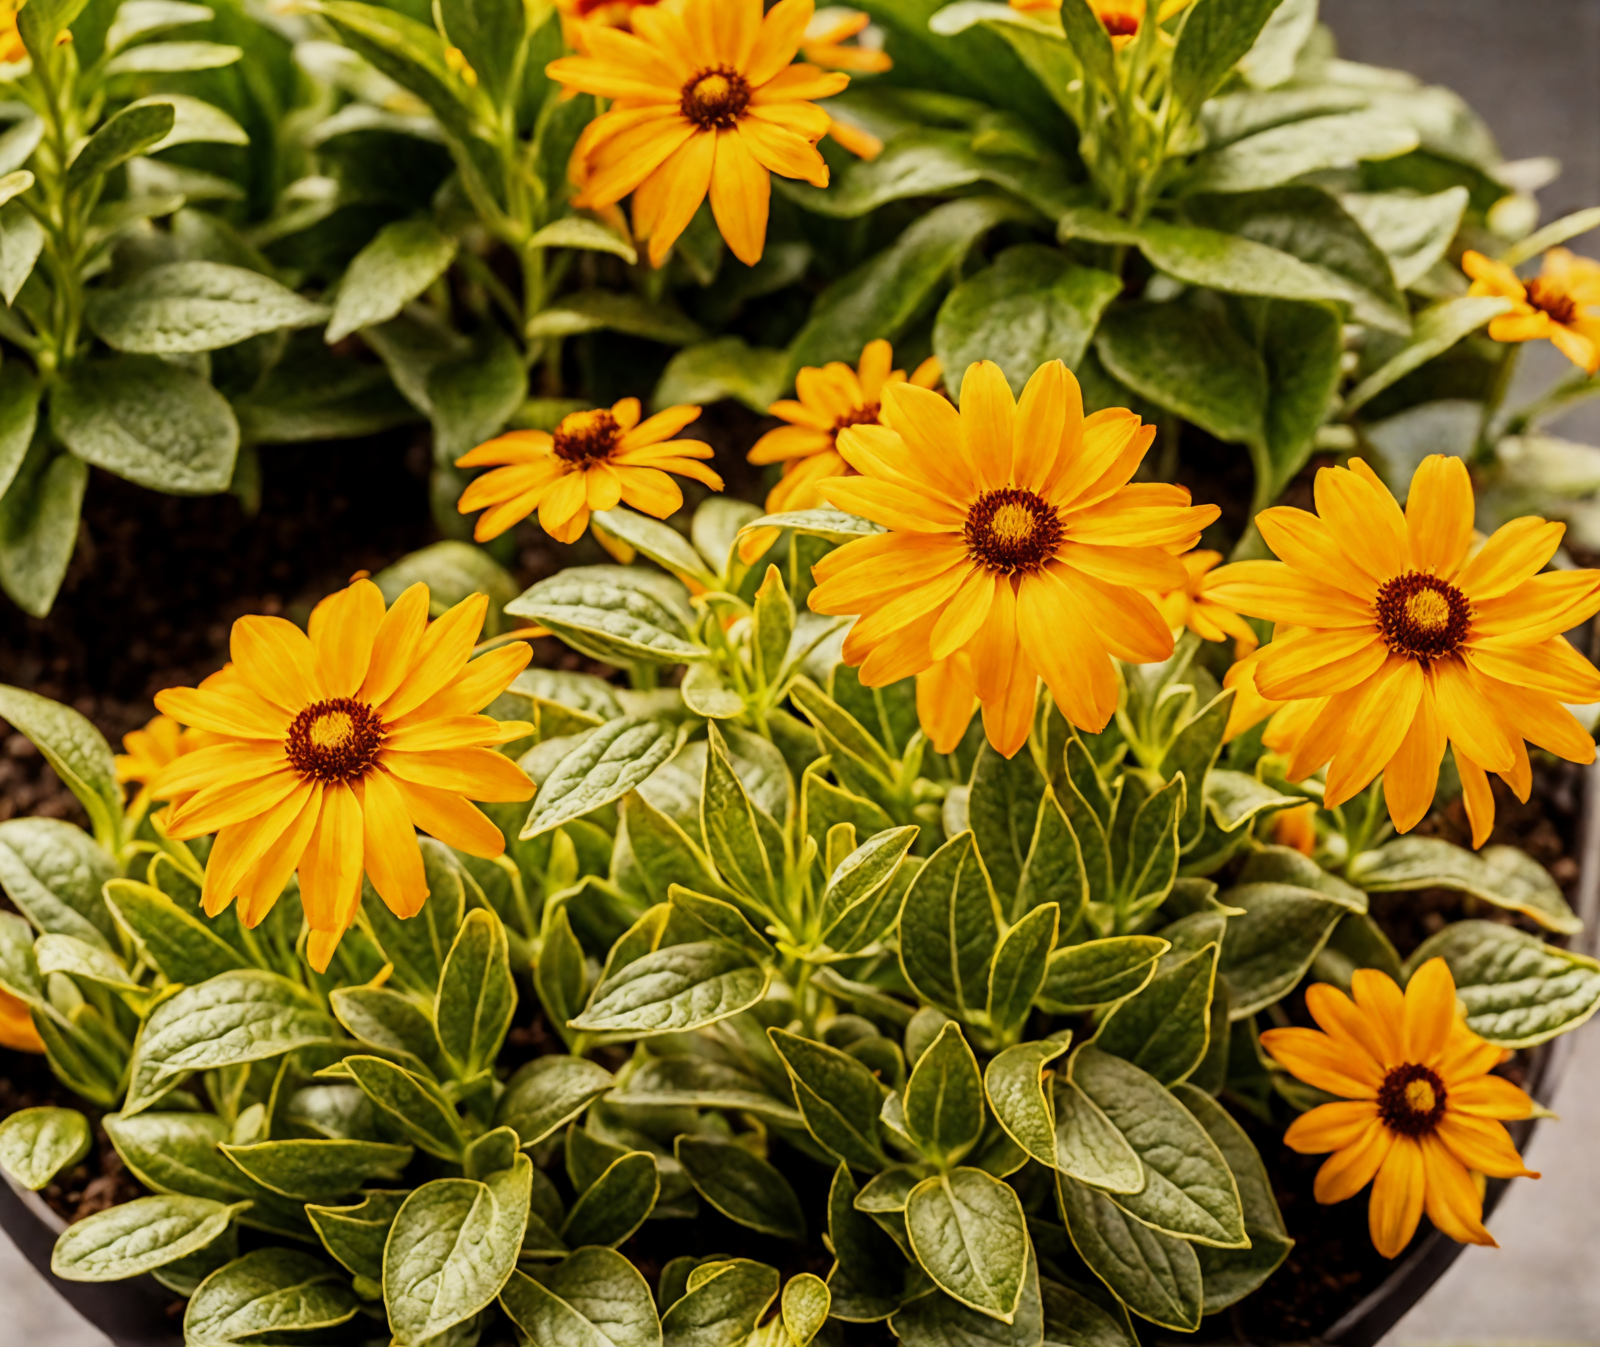 Rudbeckia hirta flowers arranged in a bowl, with clear lighting against a dark background, as indoor decor.